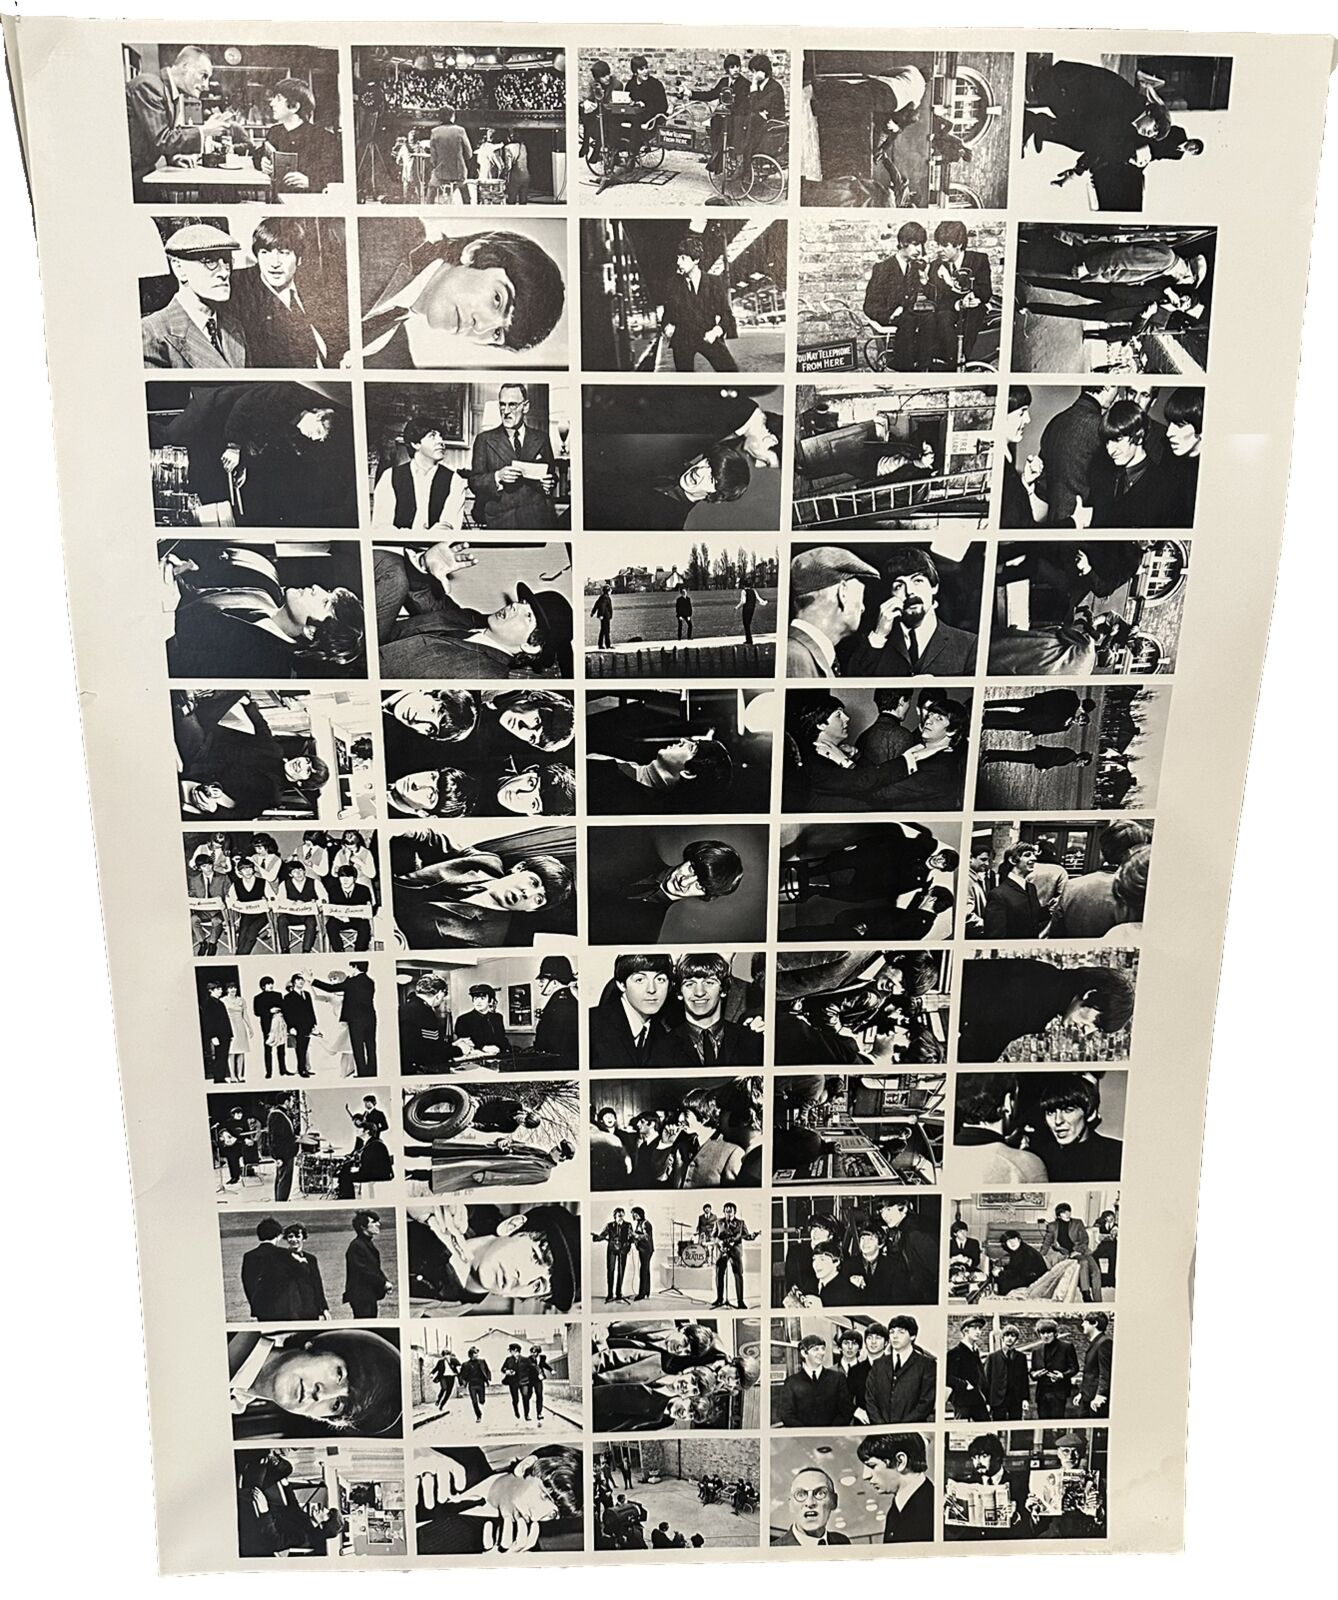 Ultra Rare BEATLES A Hard Day's Night Uncut Trading Card Sheet 55 Cards Nr. Mint